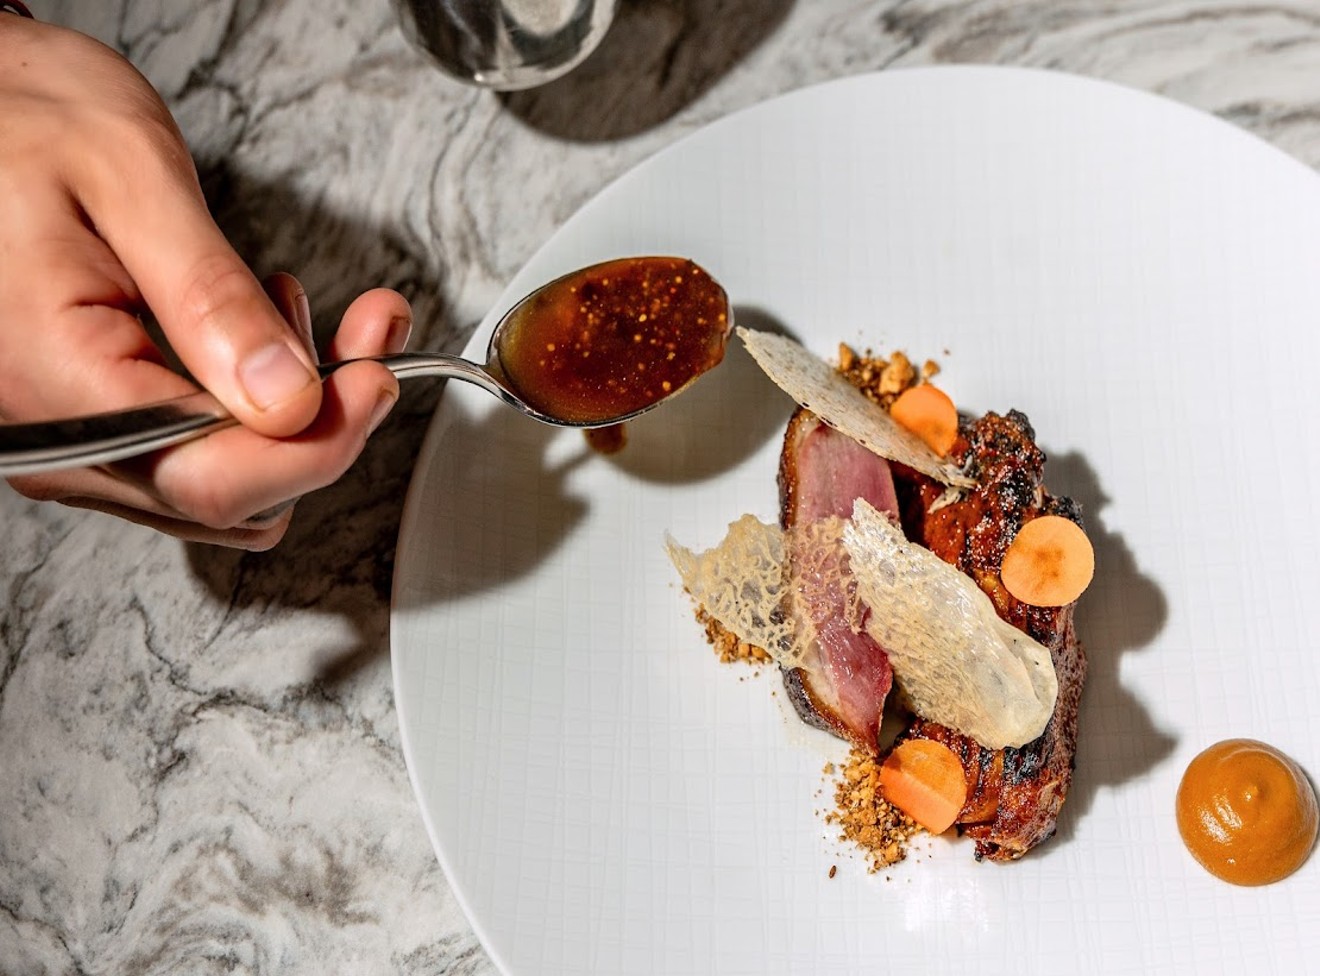 Smoked Crescent Farms duck is a highlight of the new tasting menu at Beauty & the Butcher.